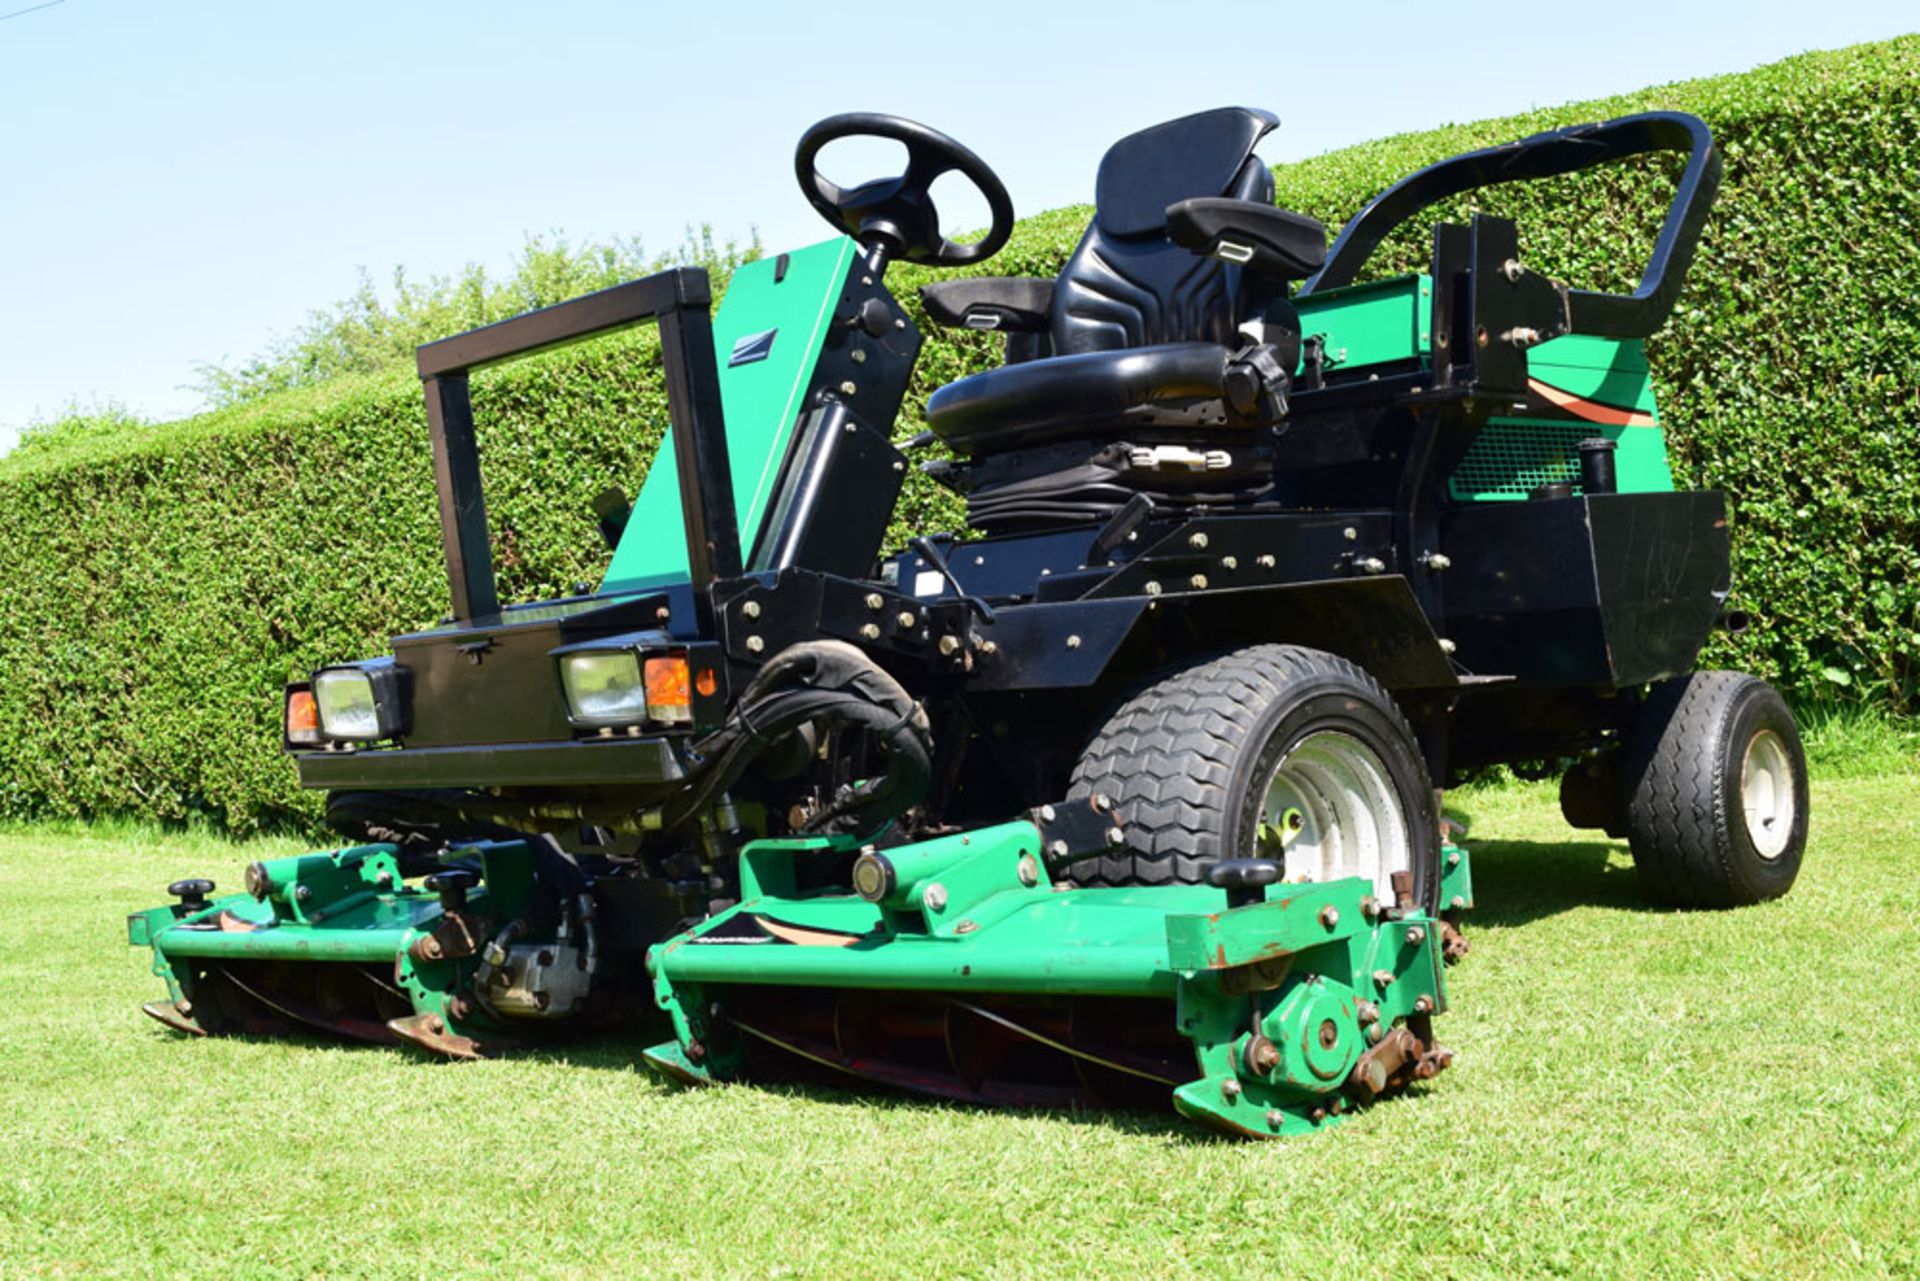 2006 Ransomes Highway 2130 4WD Cylinder Mower - Image 2 of 3